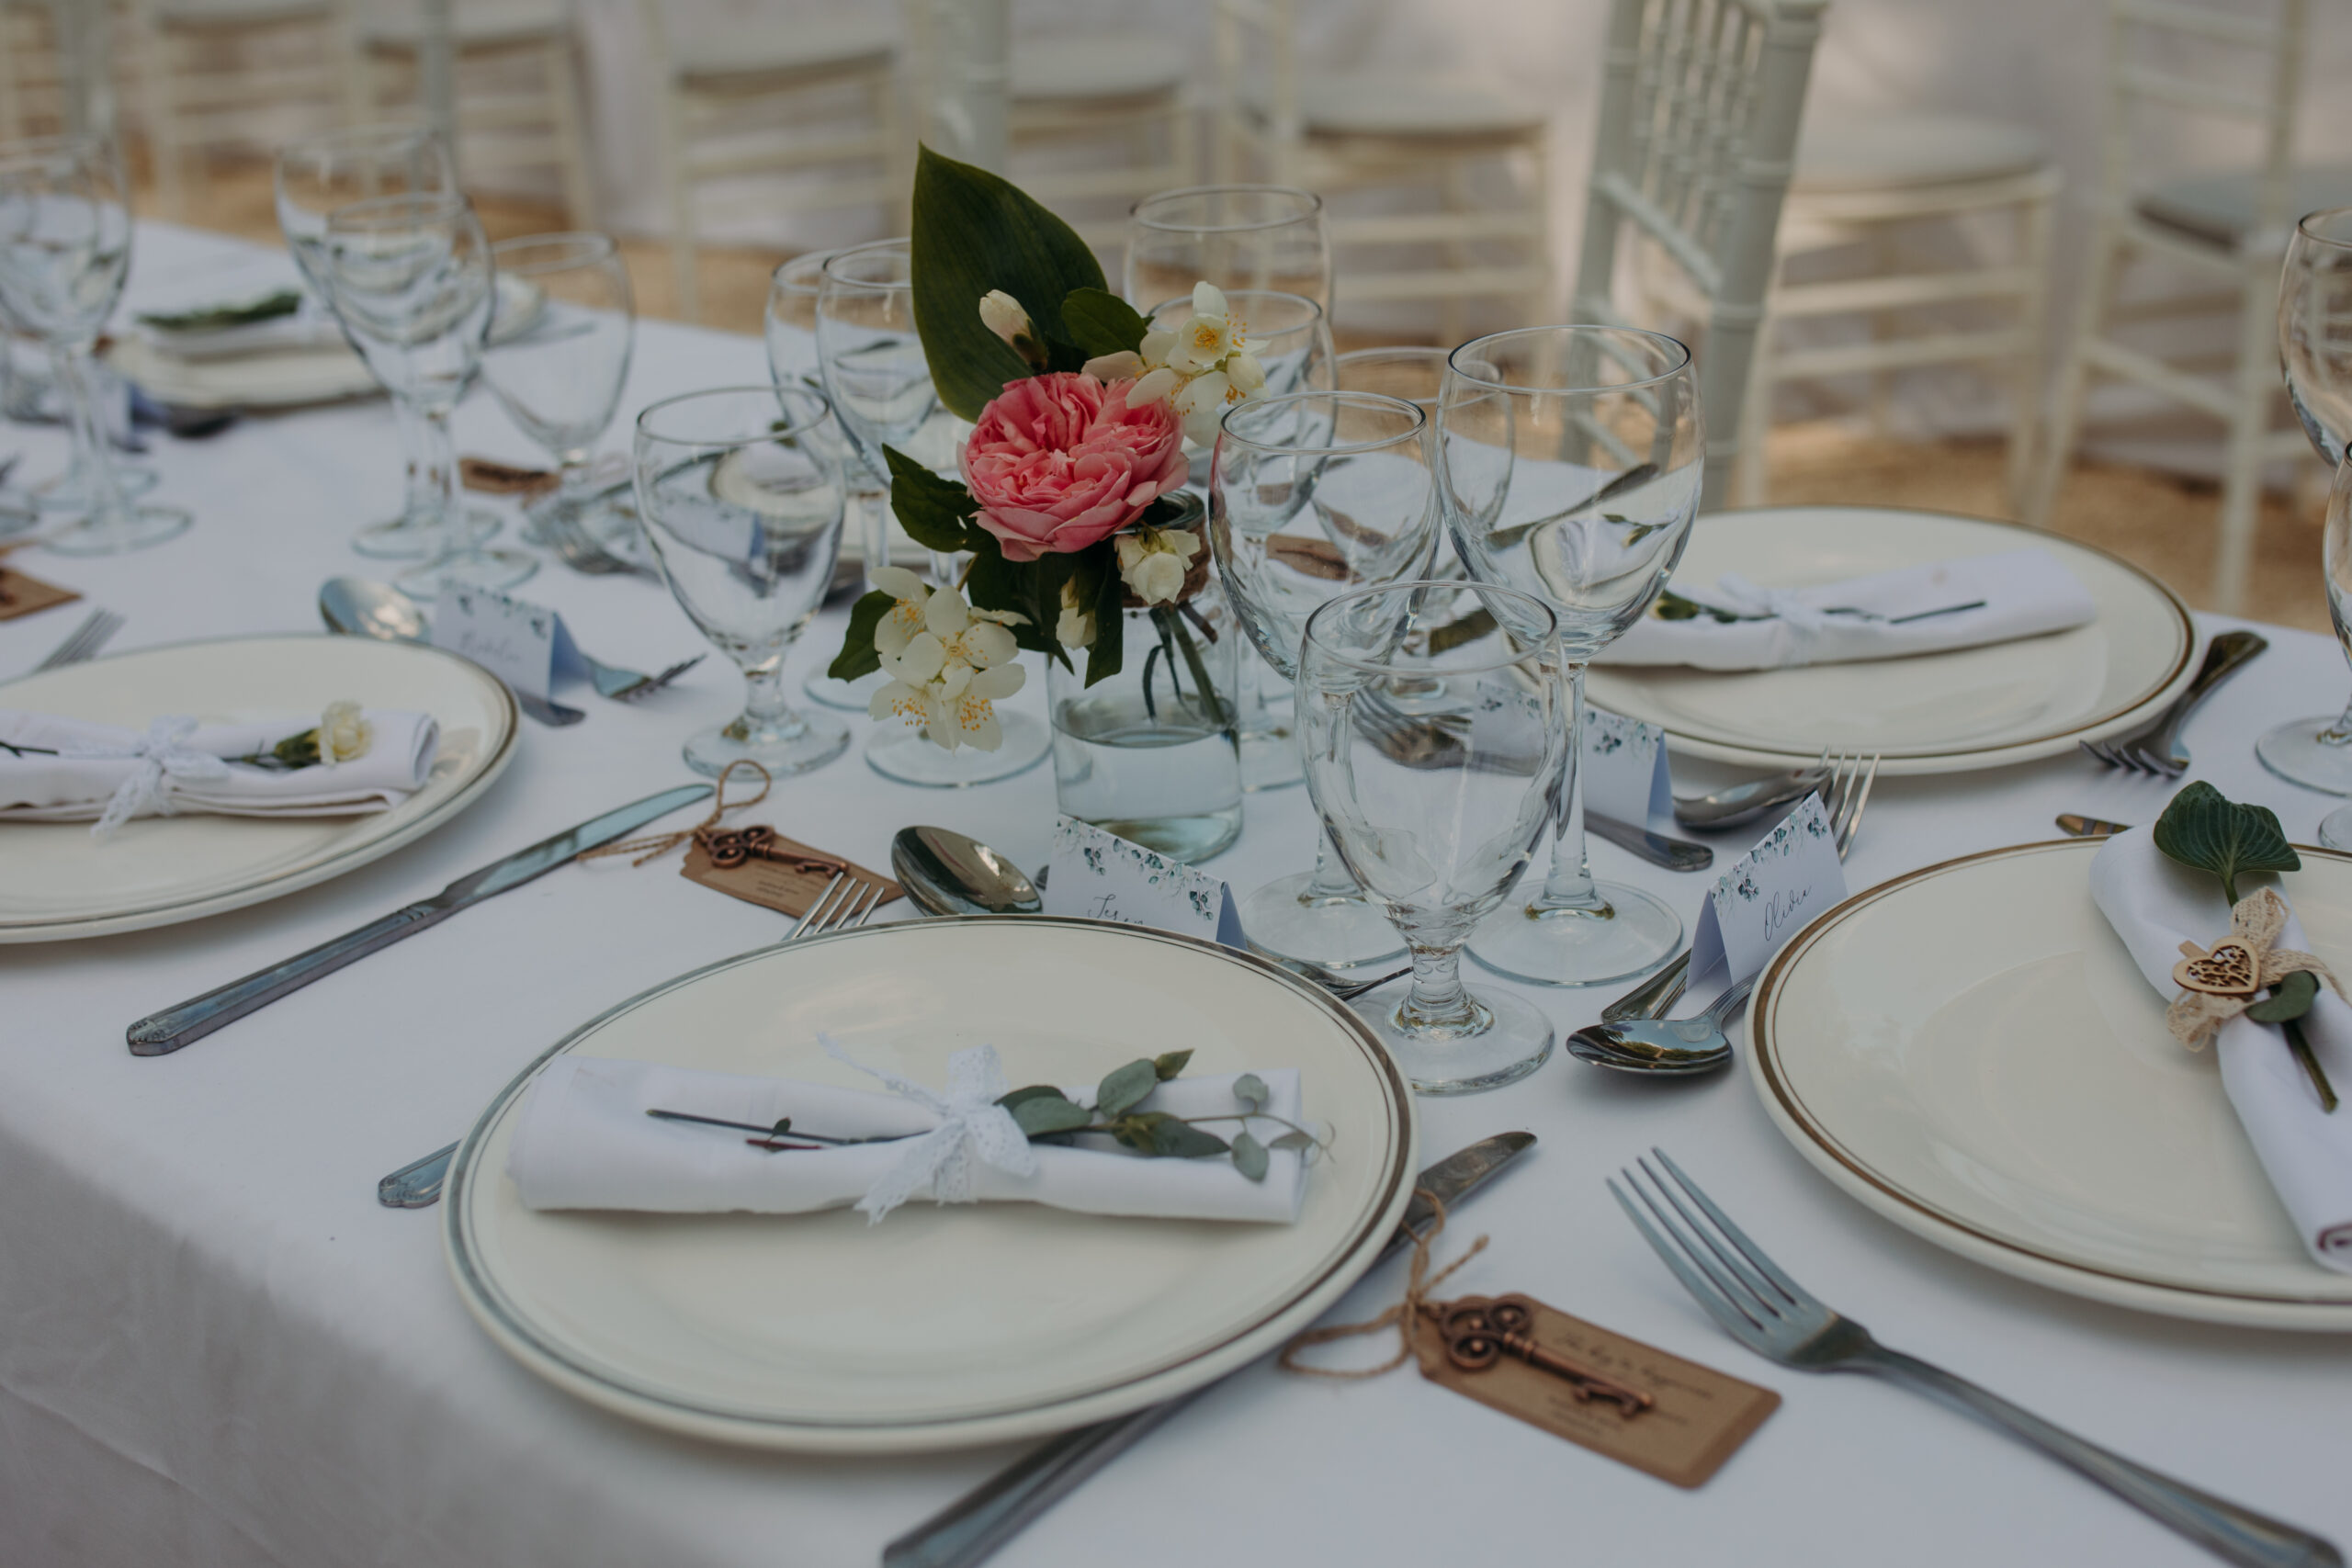 Plates and cutlery are laid out on table with rose centerpiece